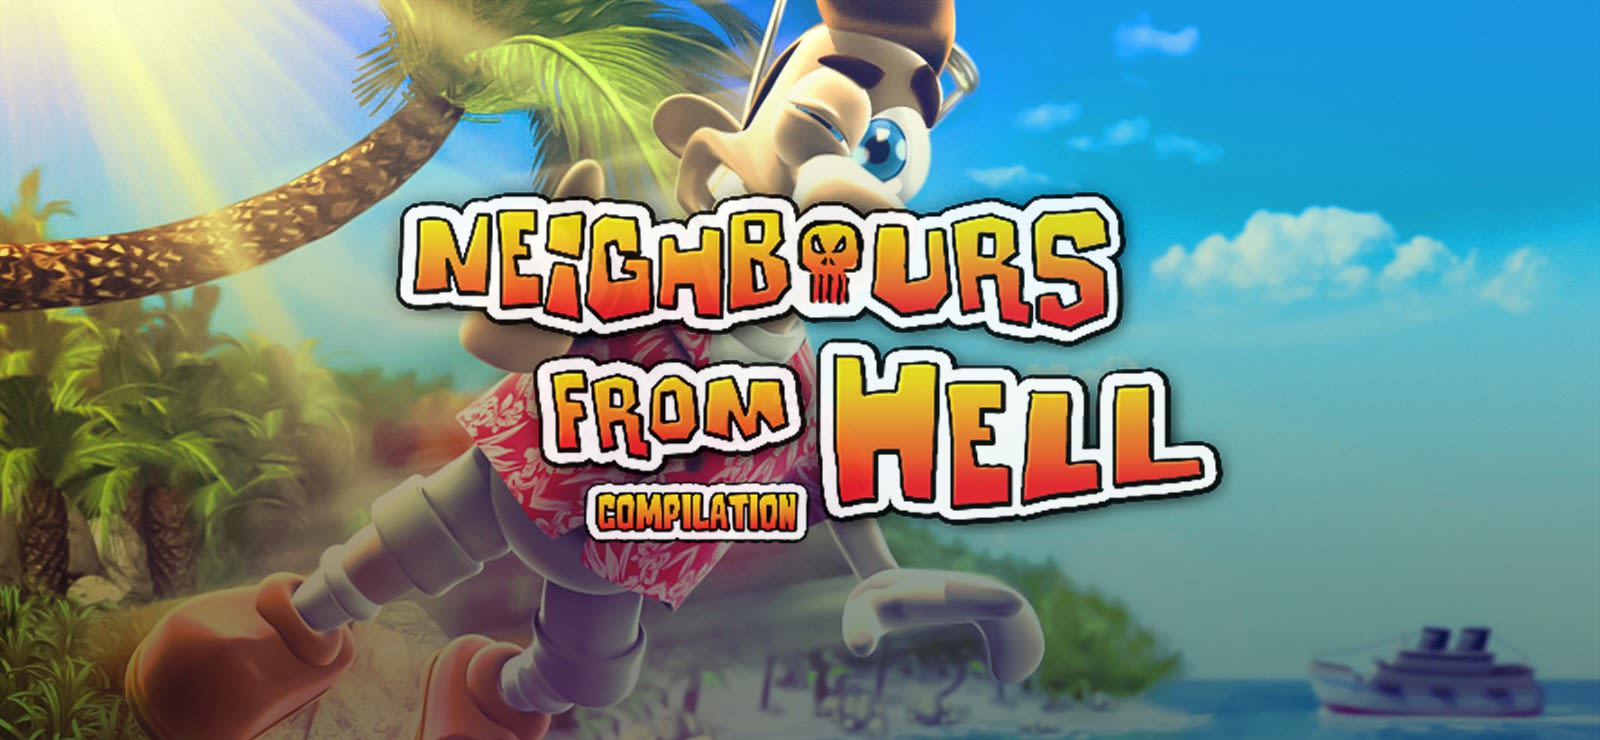 download neighbours from hell full version free